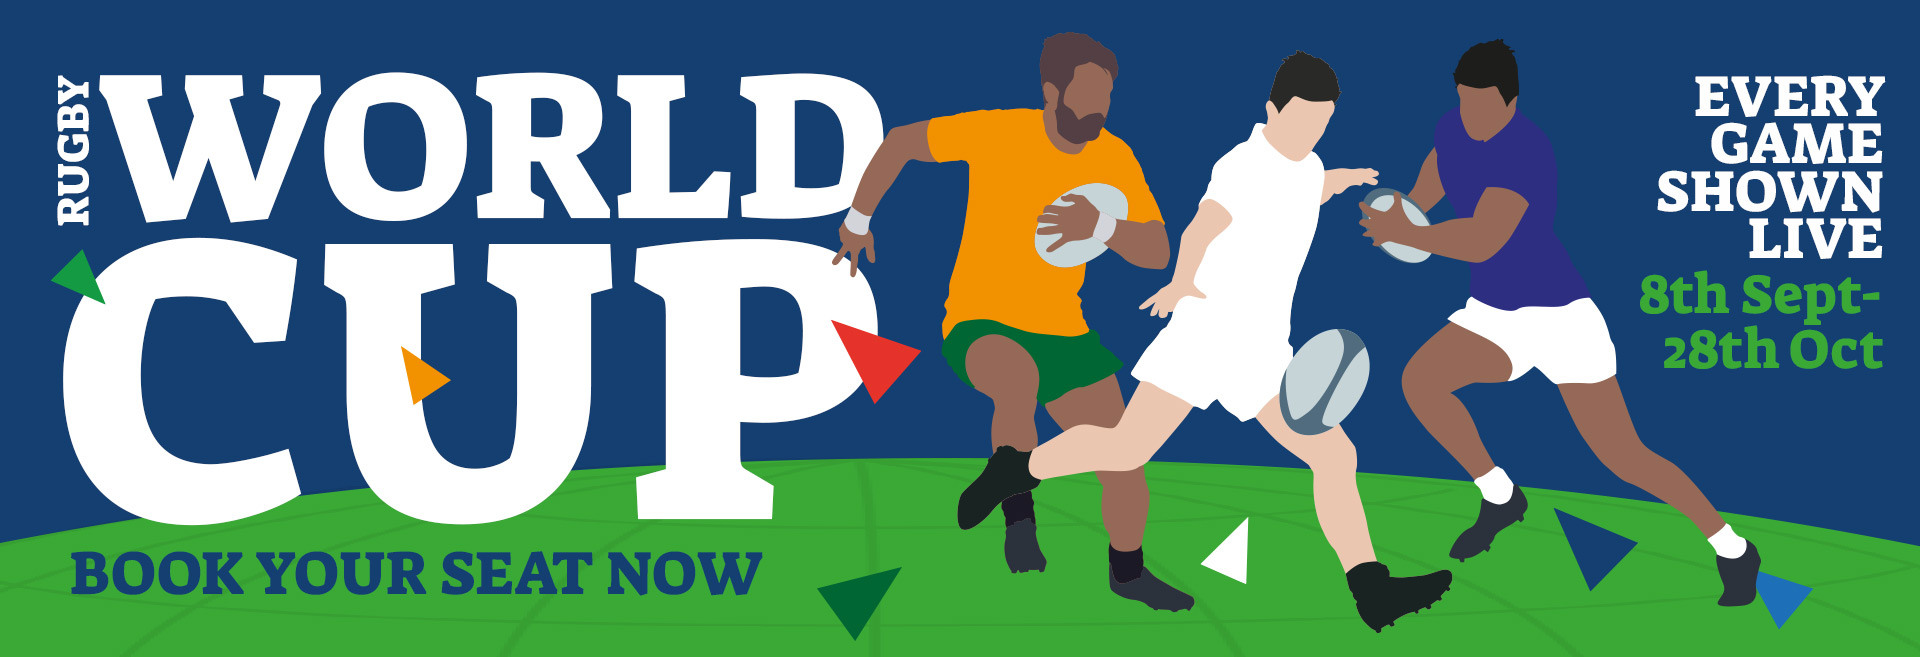 Watch the Rugby World Cup at The Drapers Arms